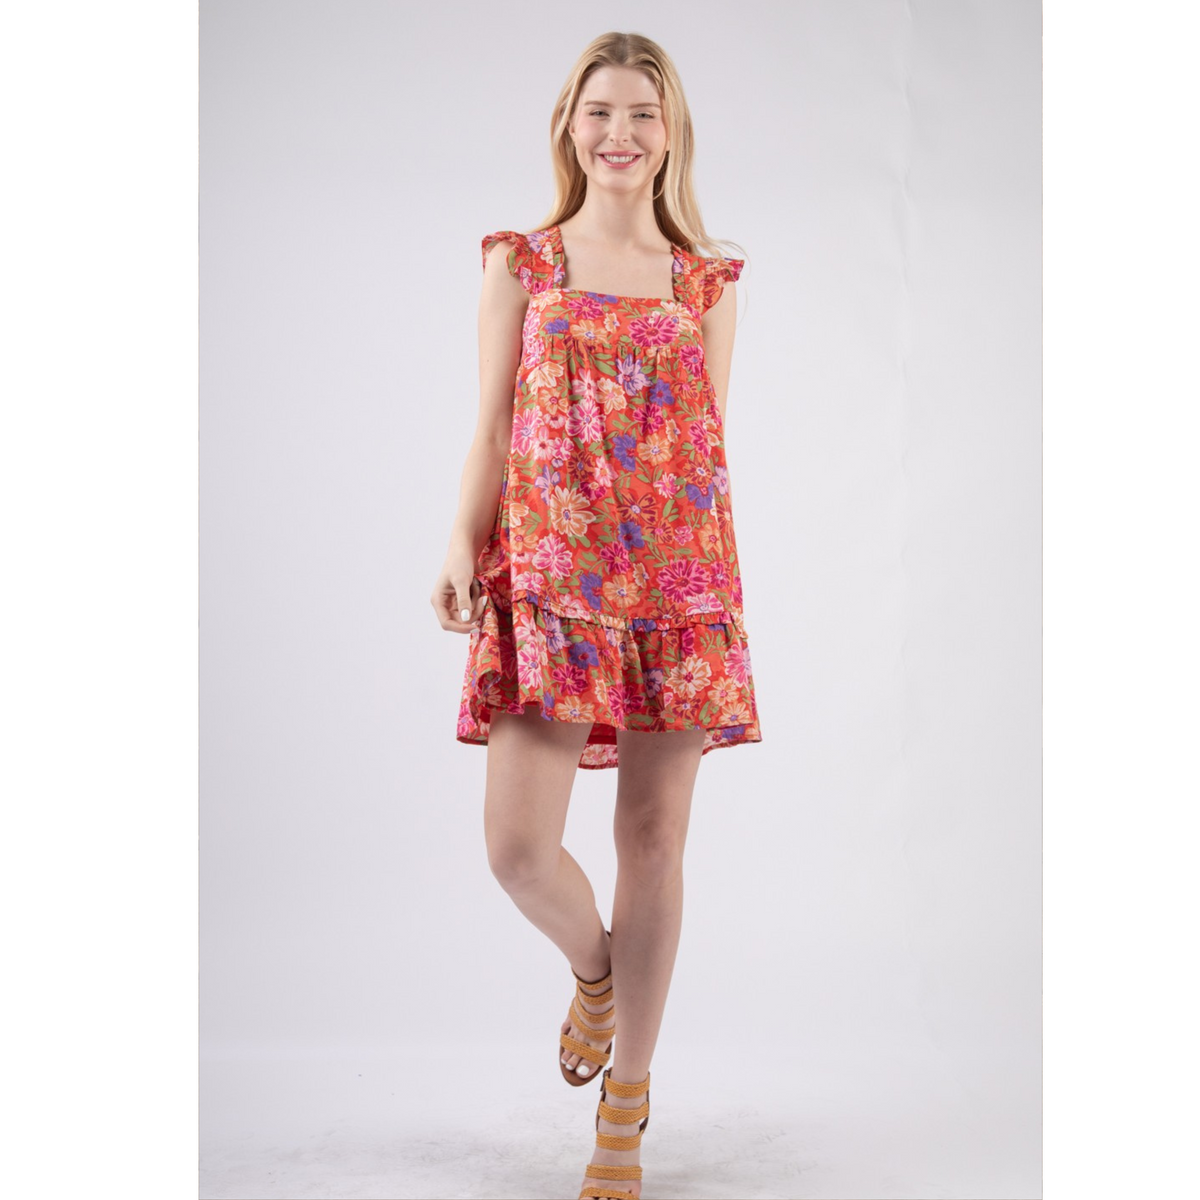 Fruit cocktail Dress Cap sleeve Dress with Tie Back